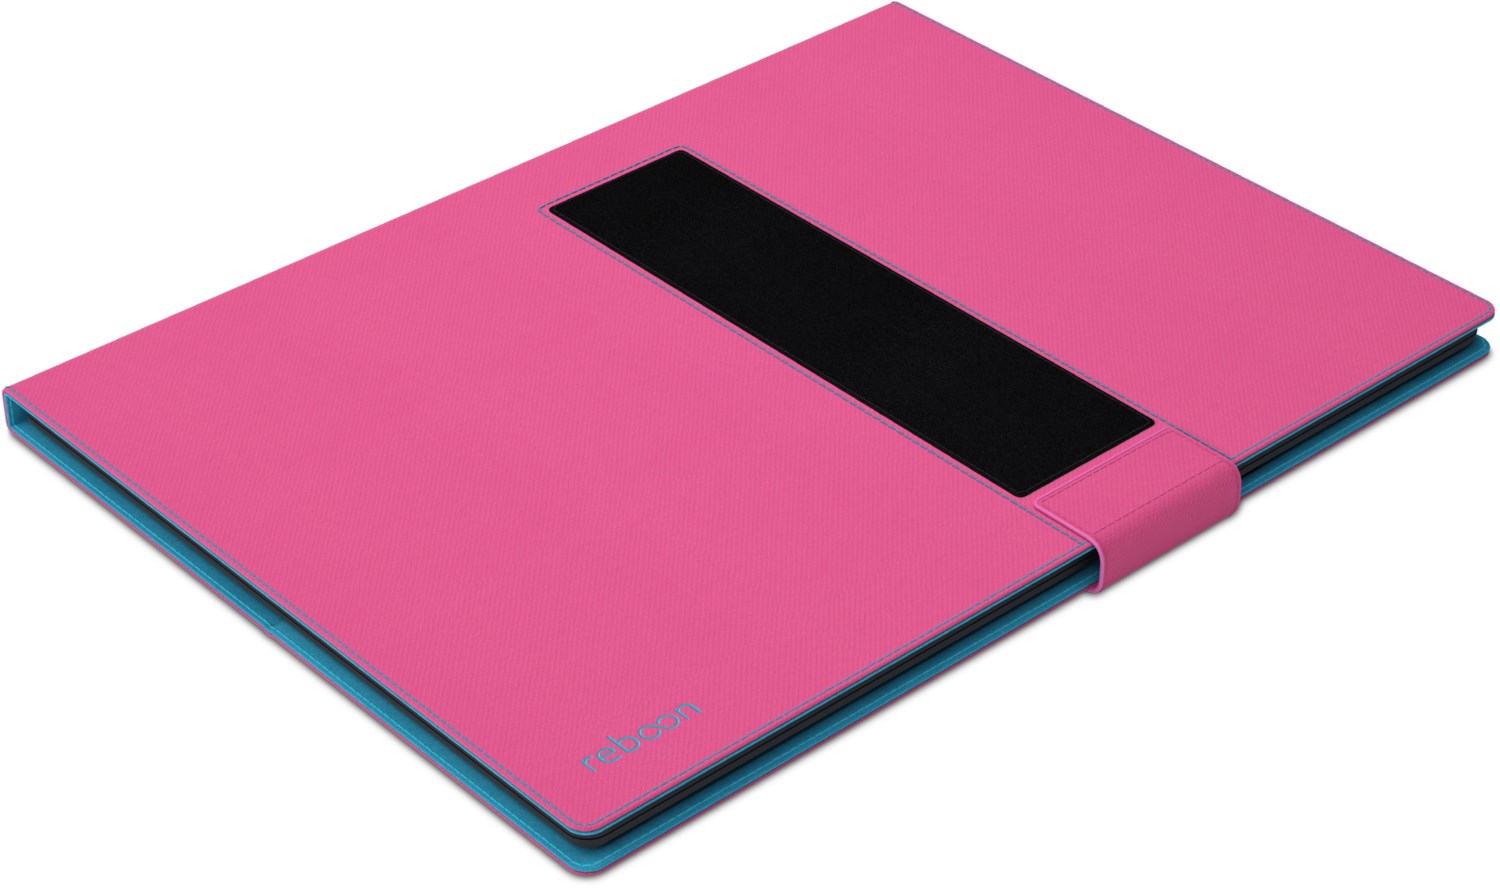 booncover S Tablethülle pink von reboon